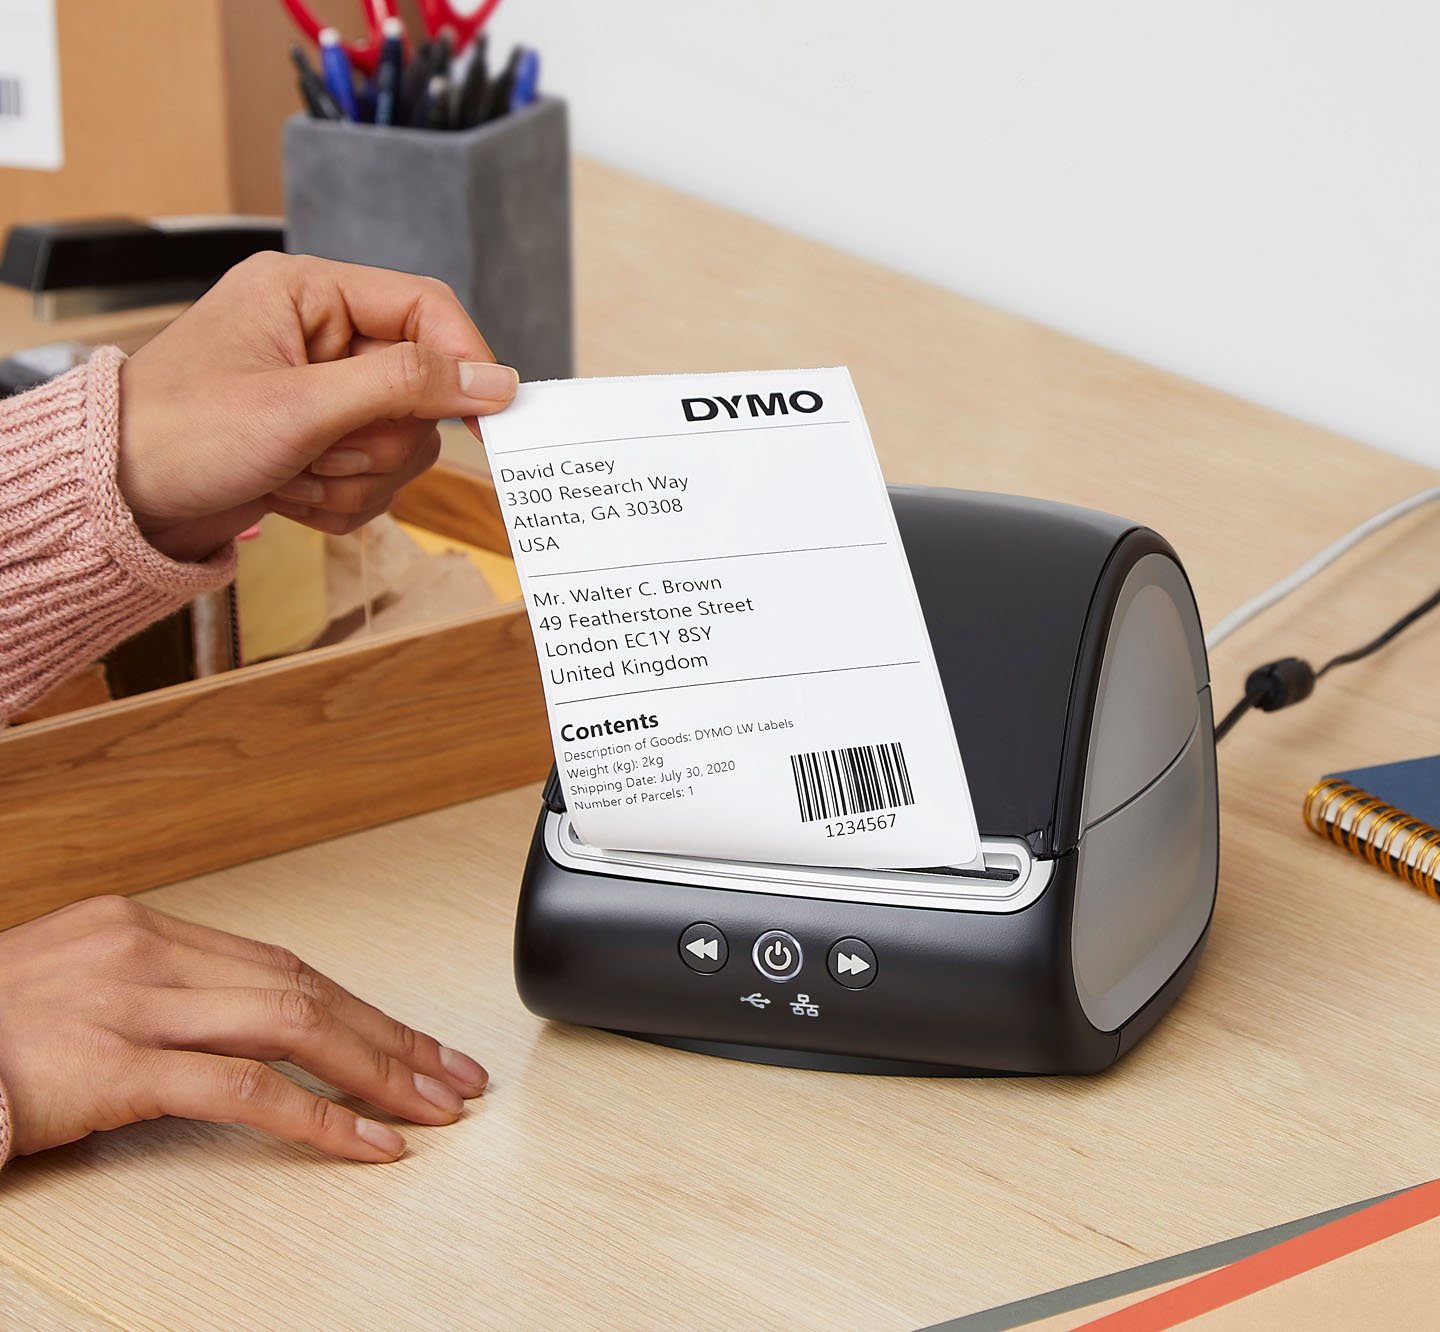 A person tearing a barcode label from a Label Writer 5 X L.